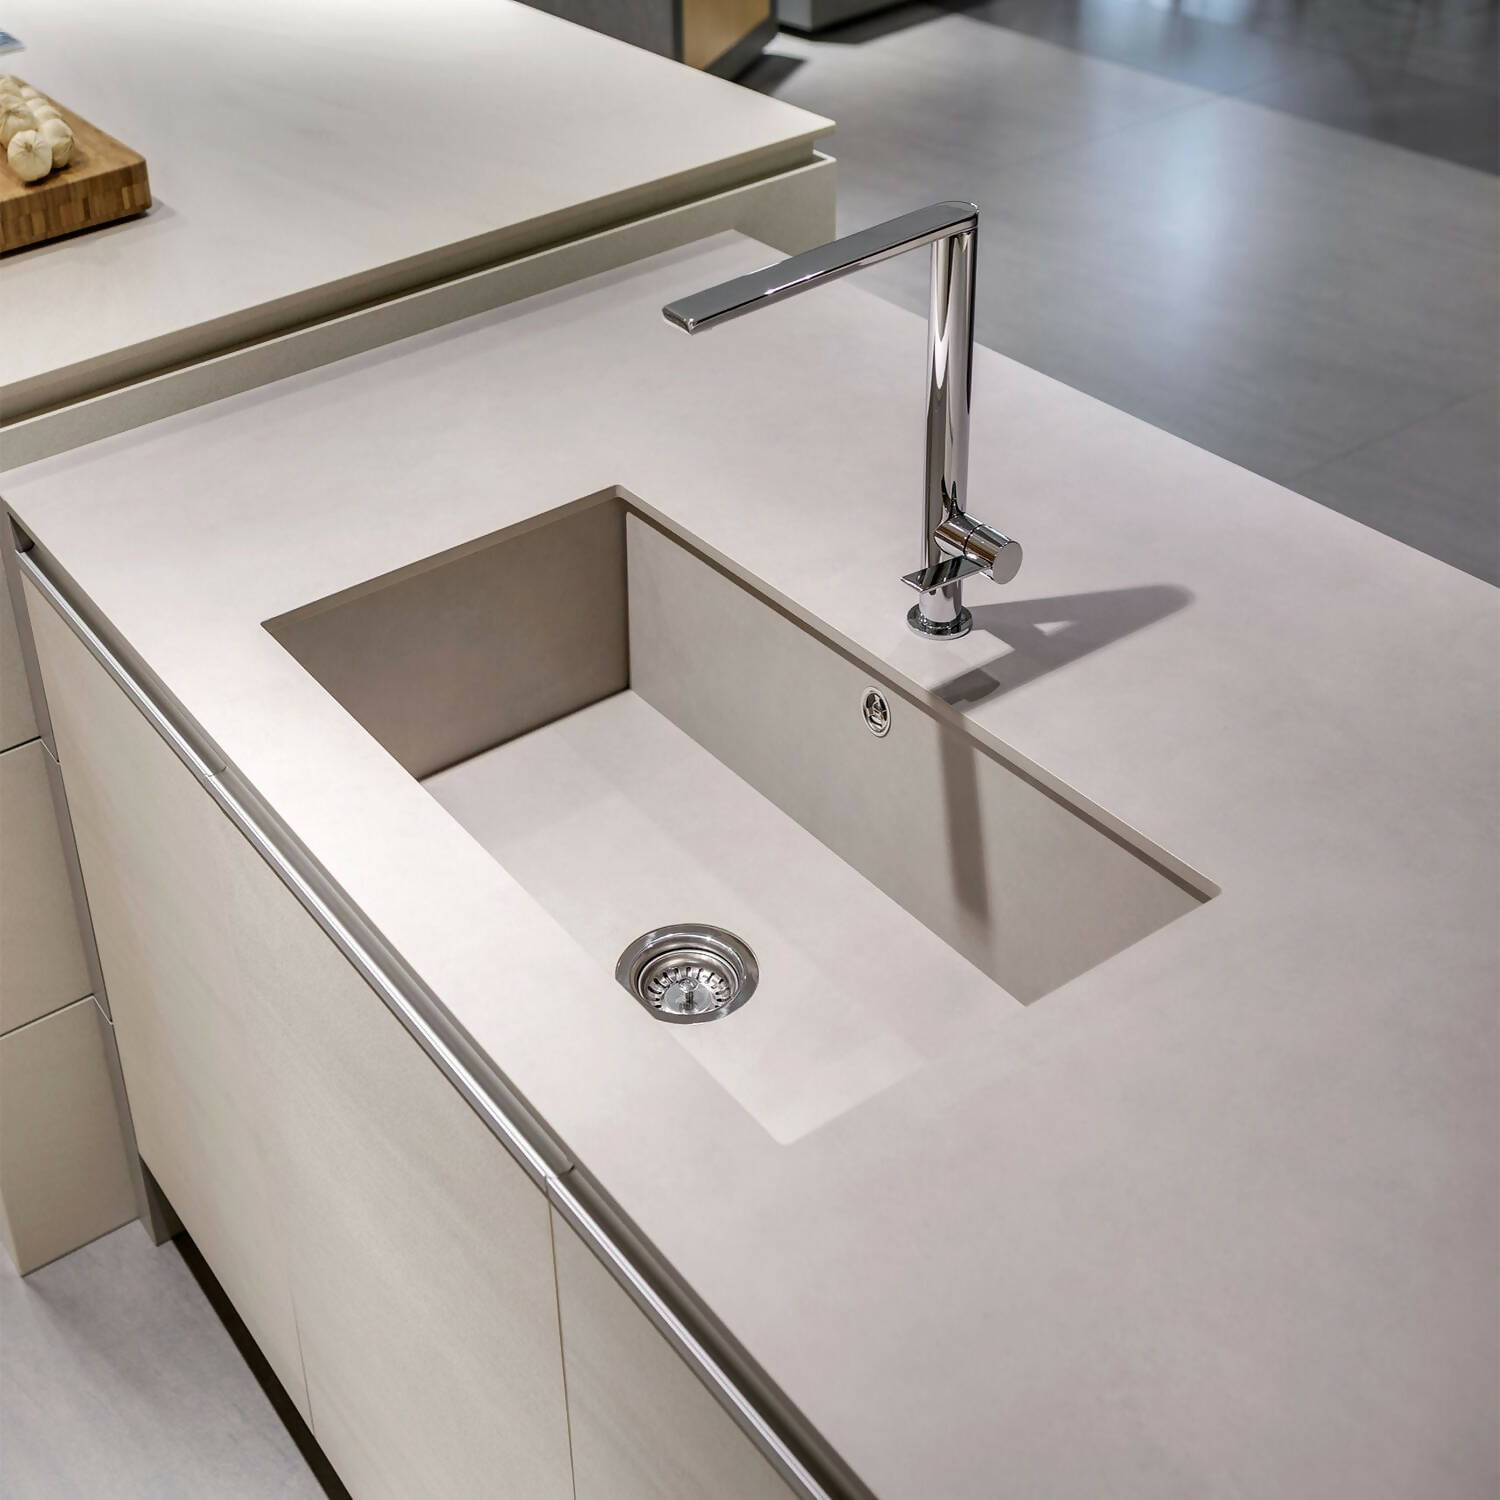 ARENA SATIN SINK,Stone Sink,NEOLITH,www.work-tops.com